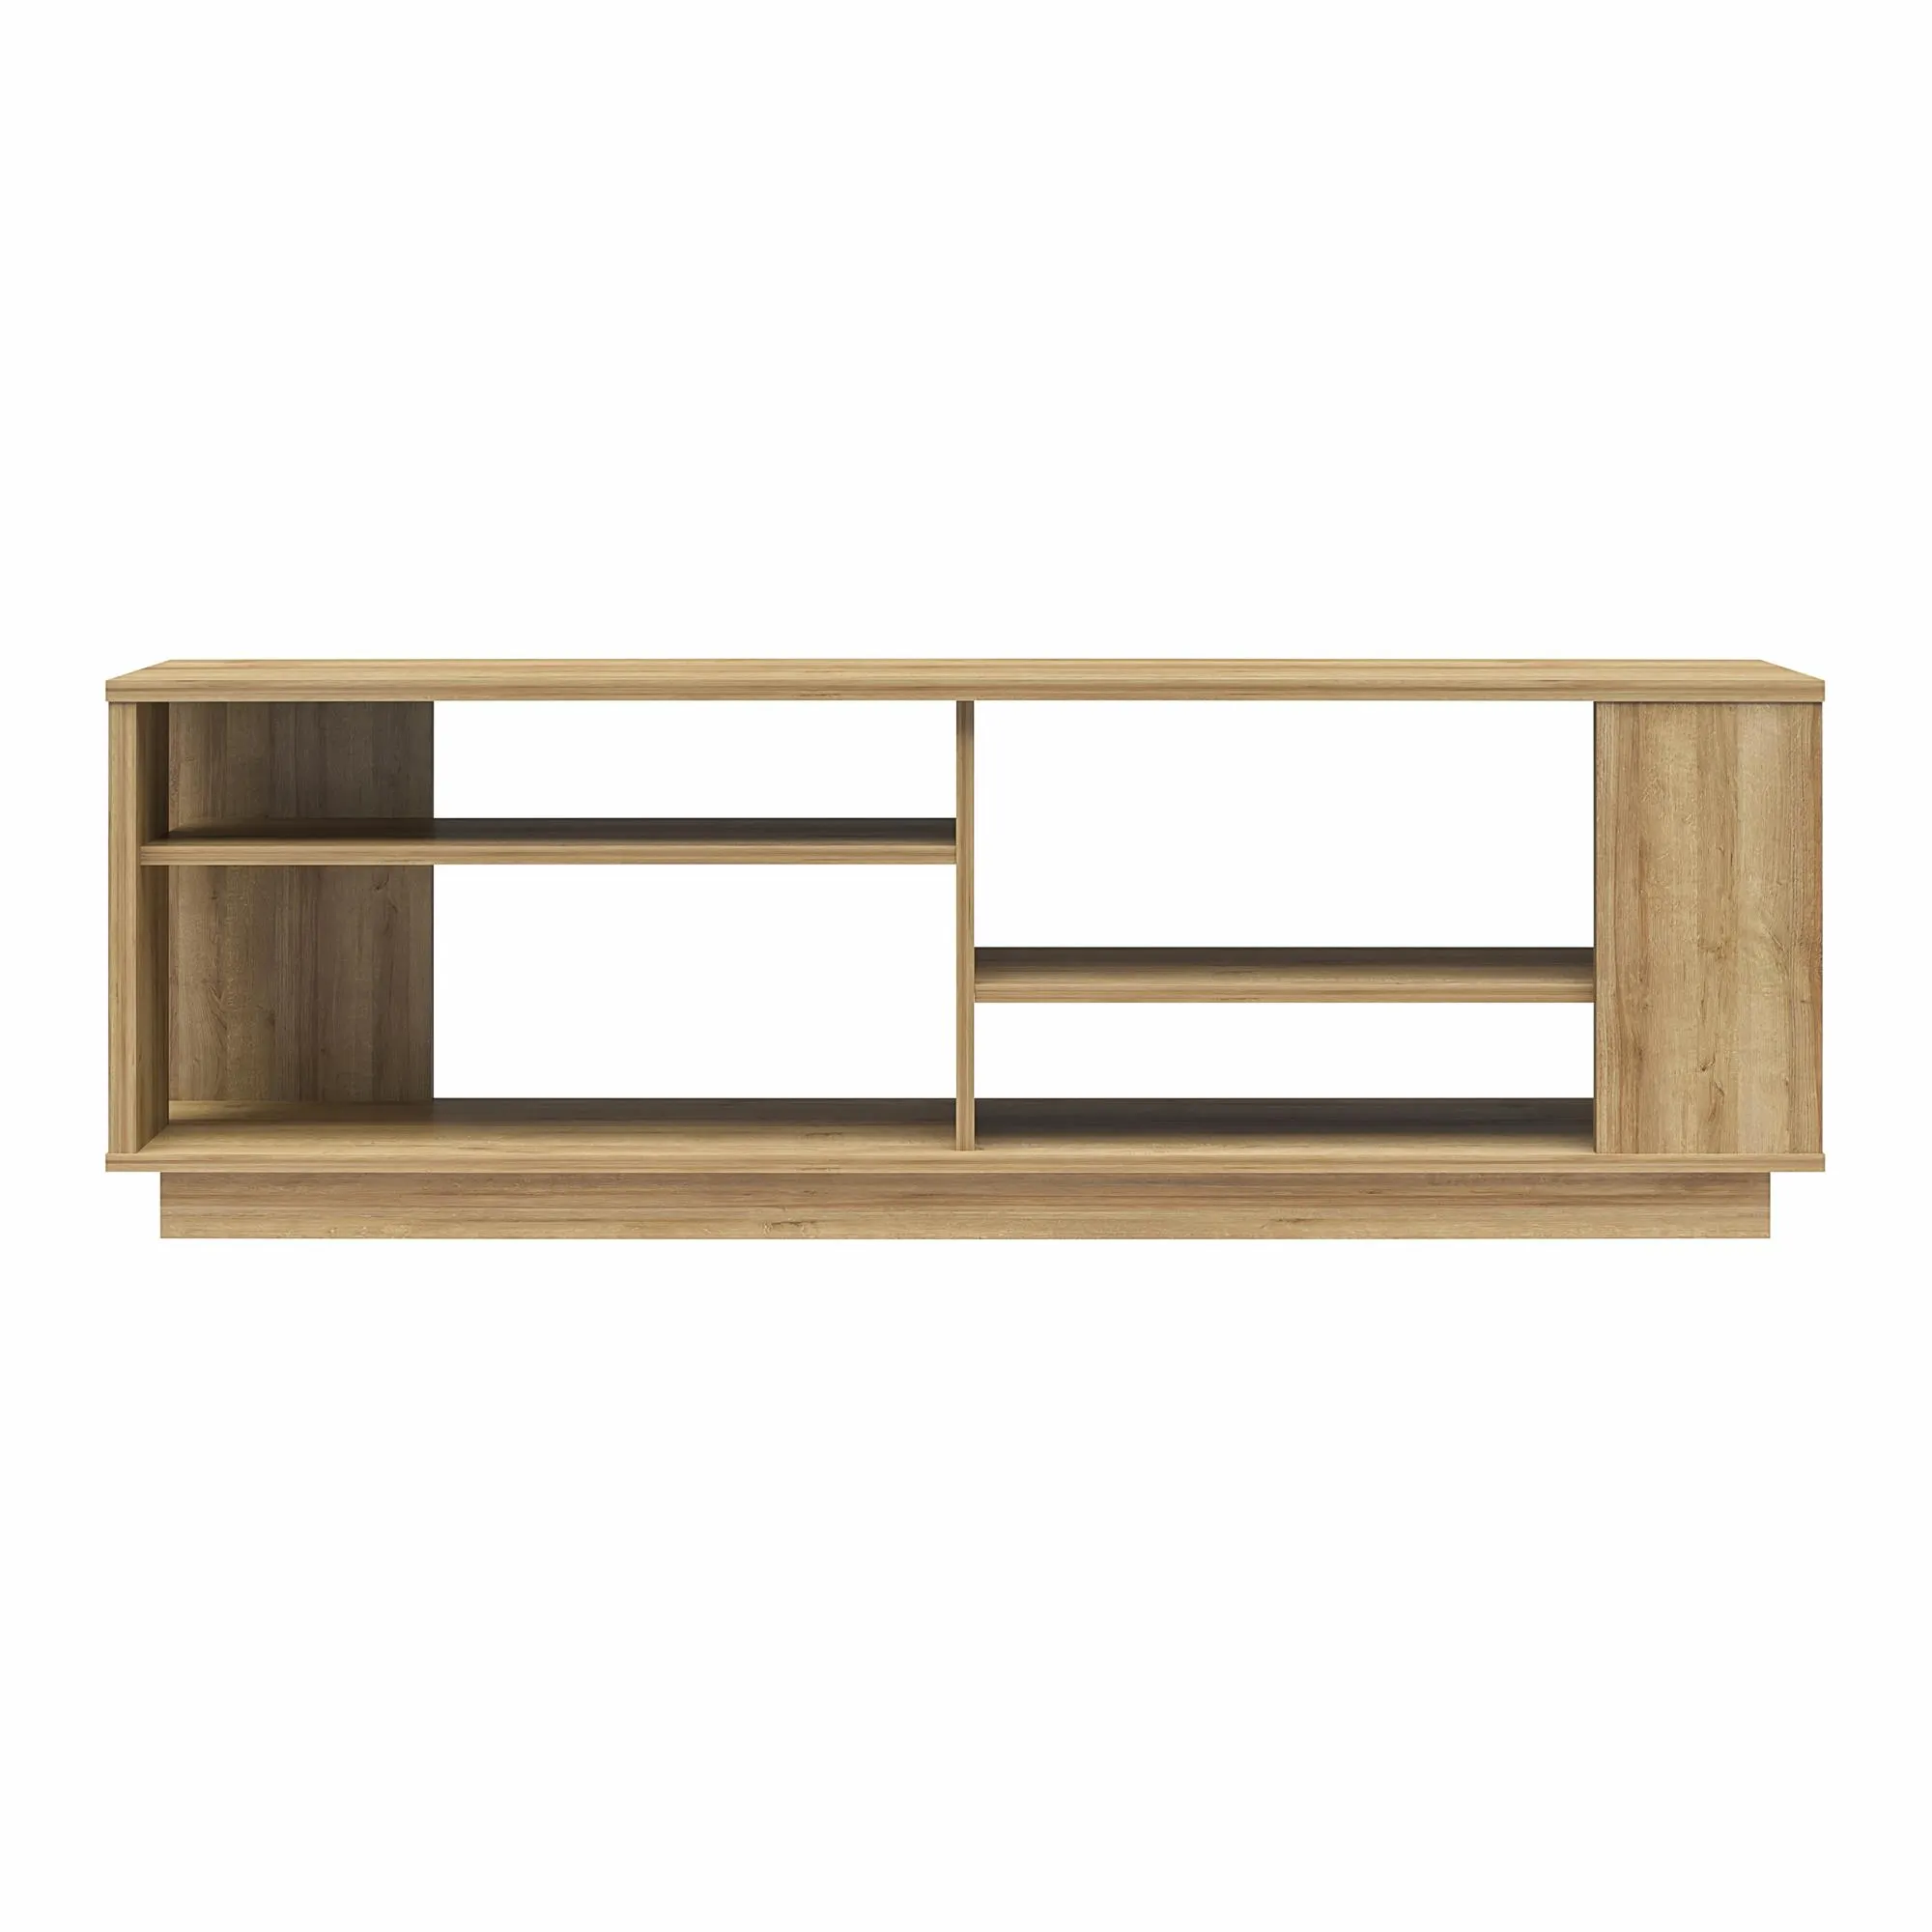 Knowle Contemporary TV Stand for TVs up to 60"